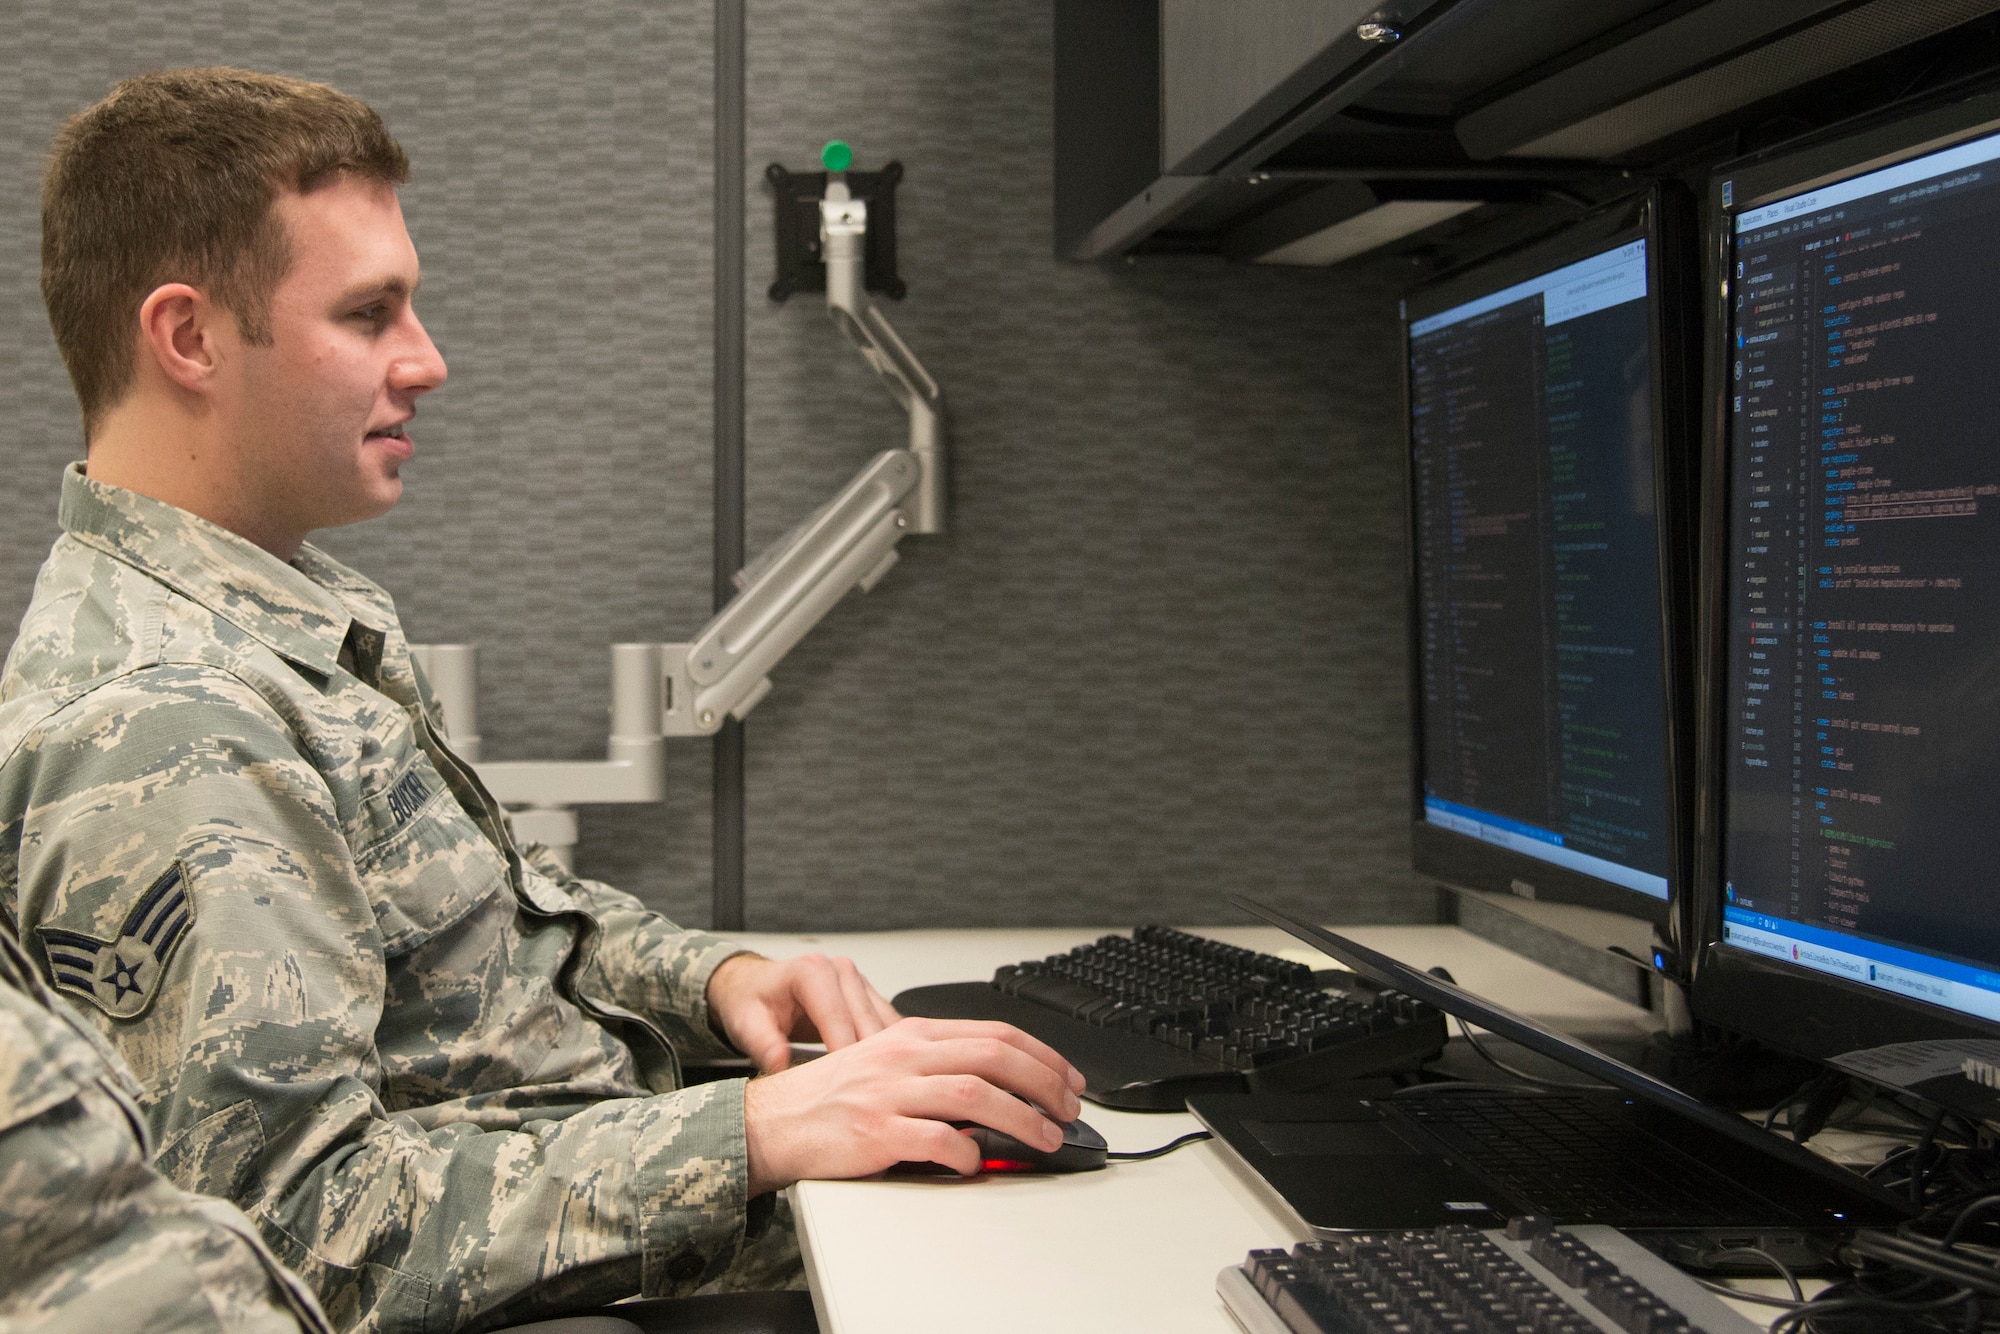 Senior Airman Christopher Buckner, Air Mobility Command application developer, works on a project Feb. 25, 2019 at Scott Air Force Base, Illinois.  When the new office space is completed two Airmen will be able to pair program which allows them to work alongside each other as one enters information and the other performs a quality check. (U.S. Air Force Photo by Airman 1st Class Kristin Savage)